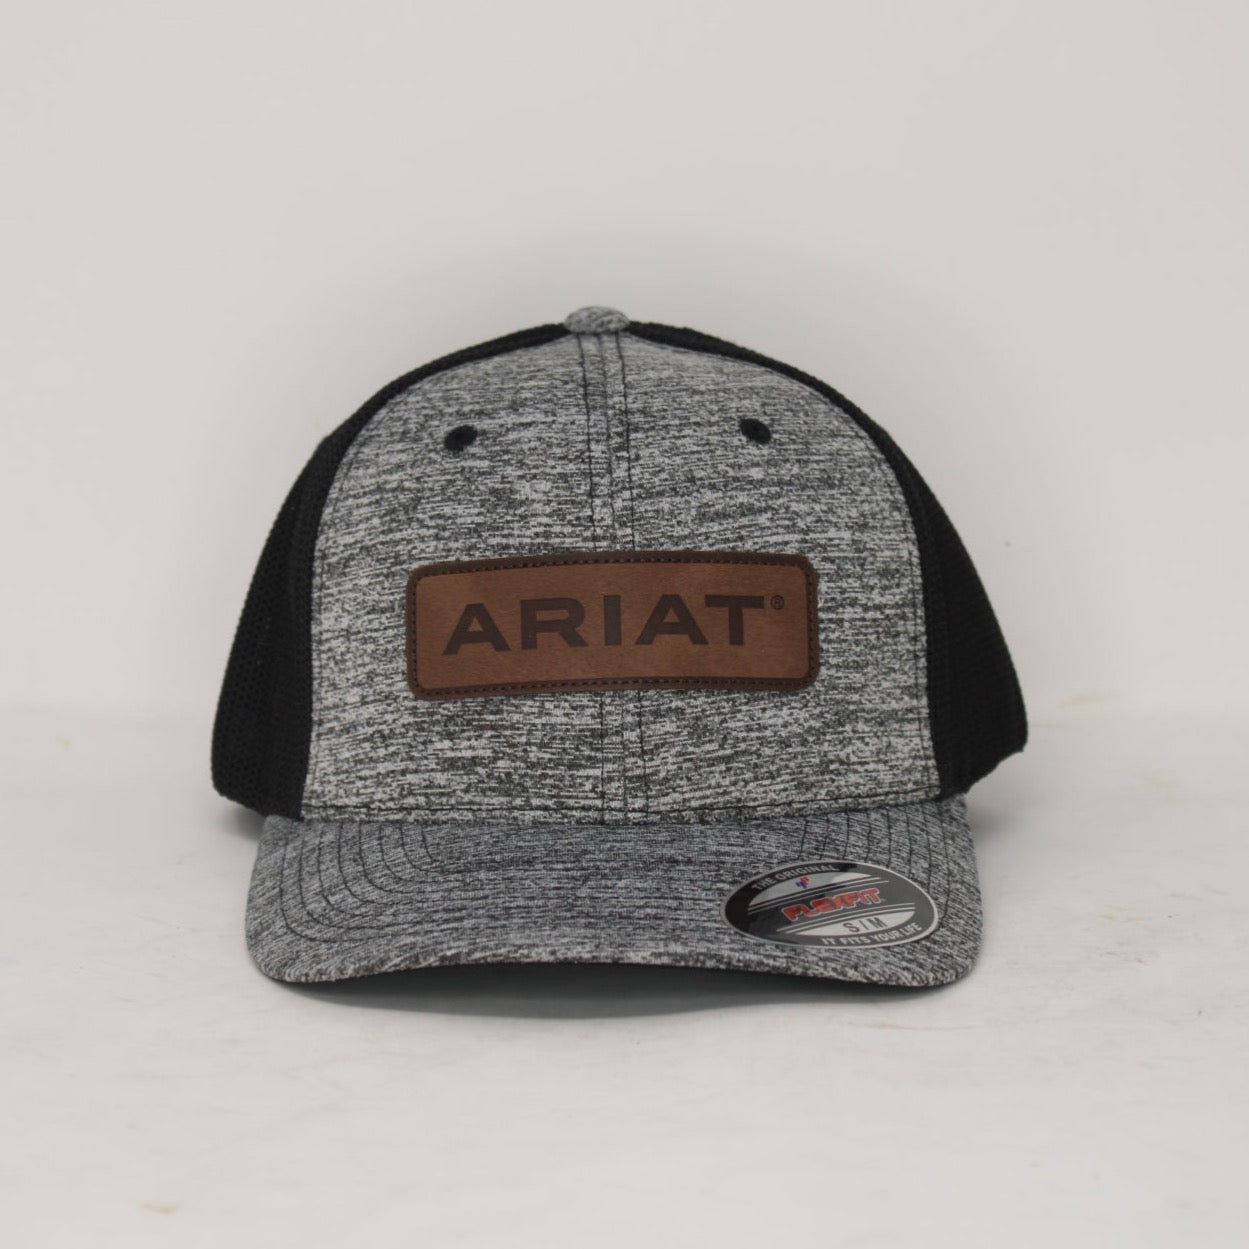 "Kam" Ariat Baseball Cap with Leather Decal